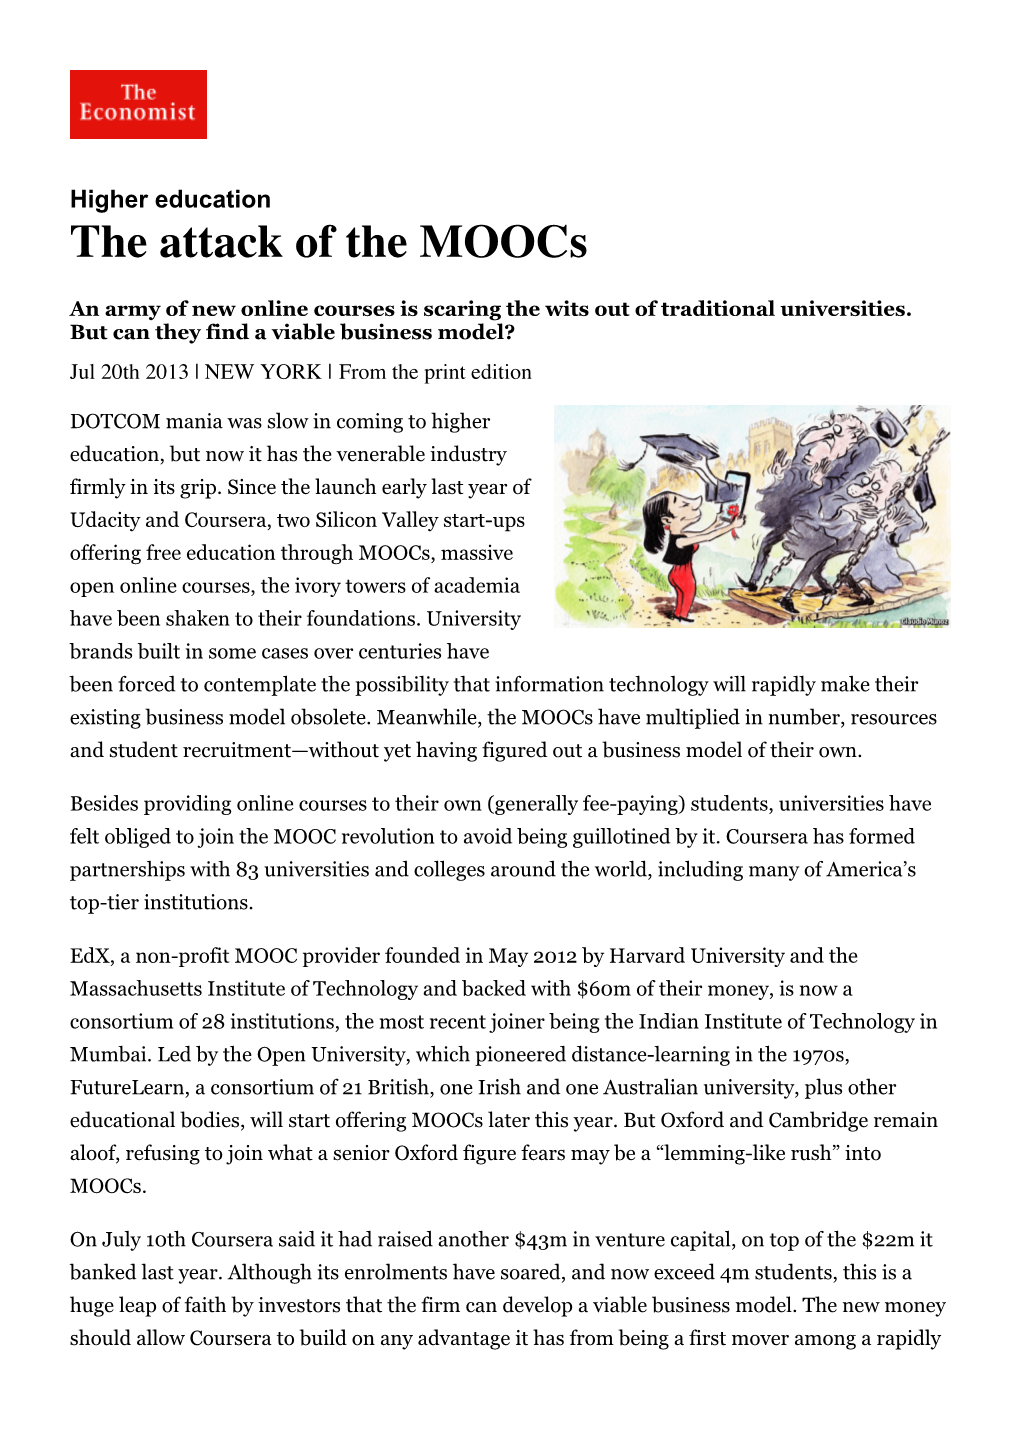 Higher Education: the Attack of the Moocs | the Economist